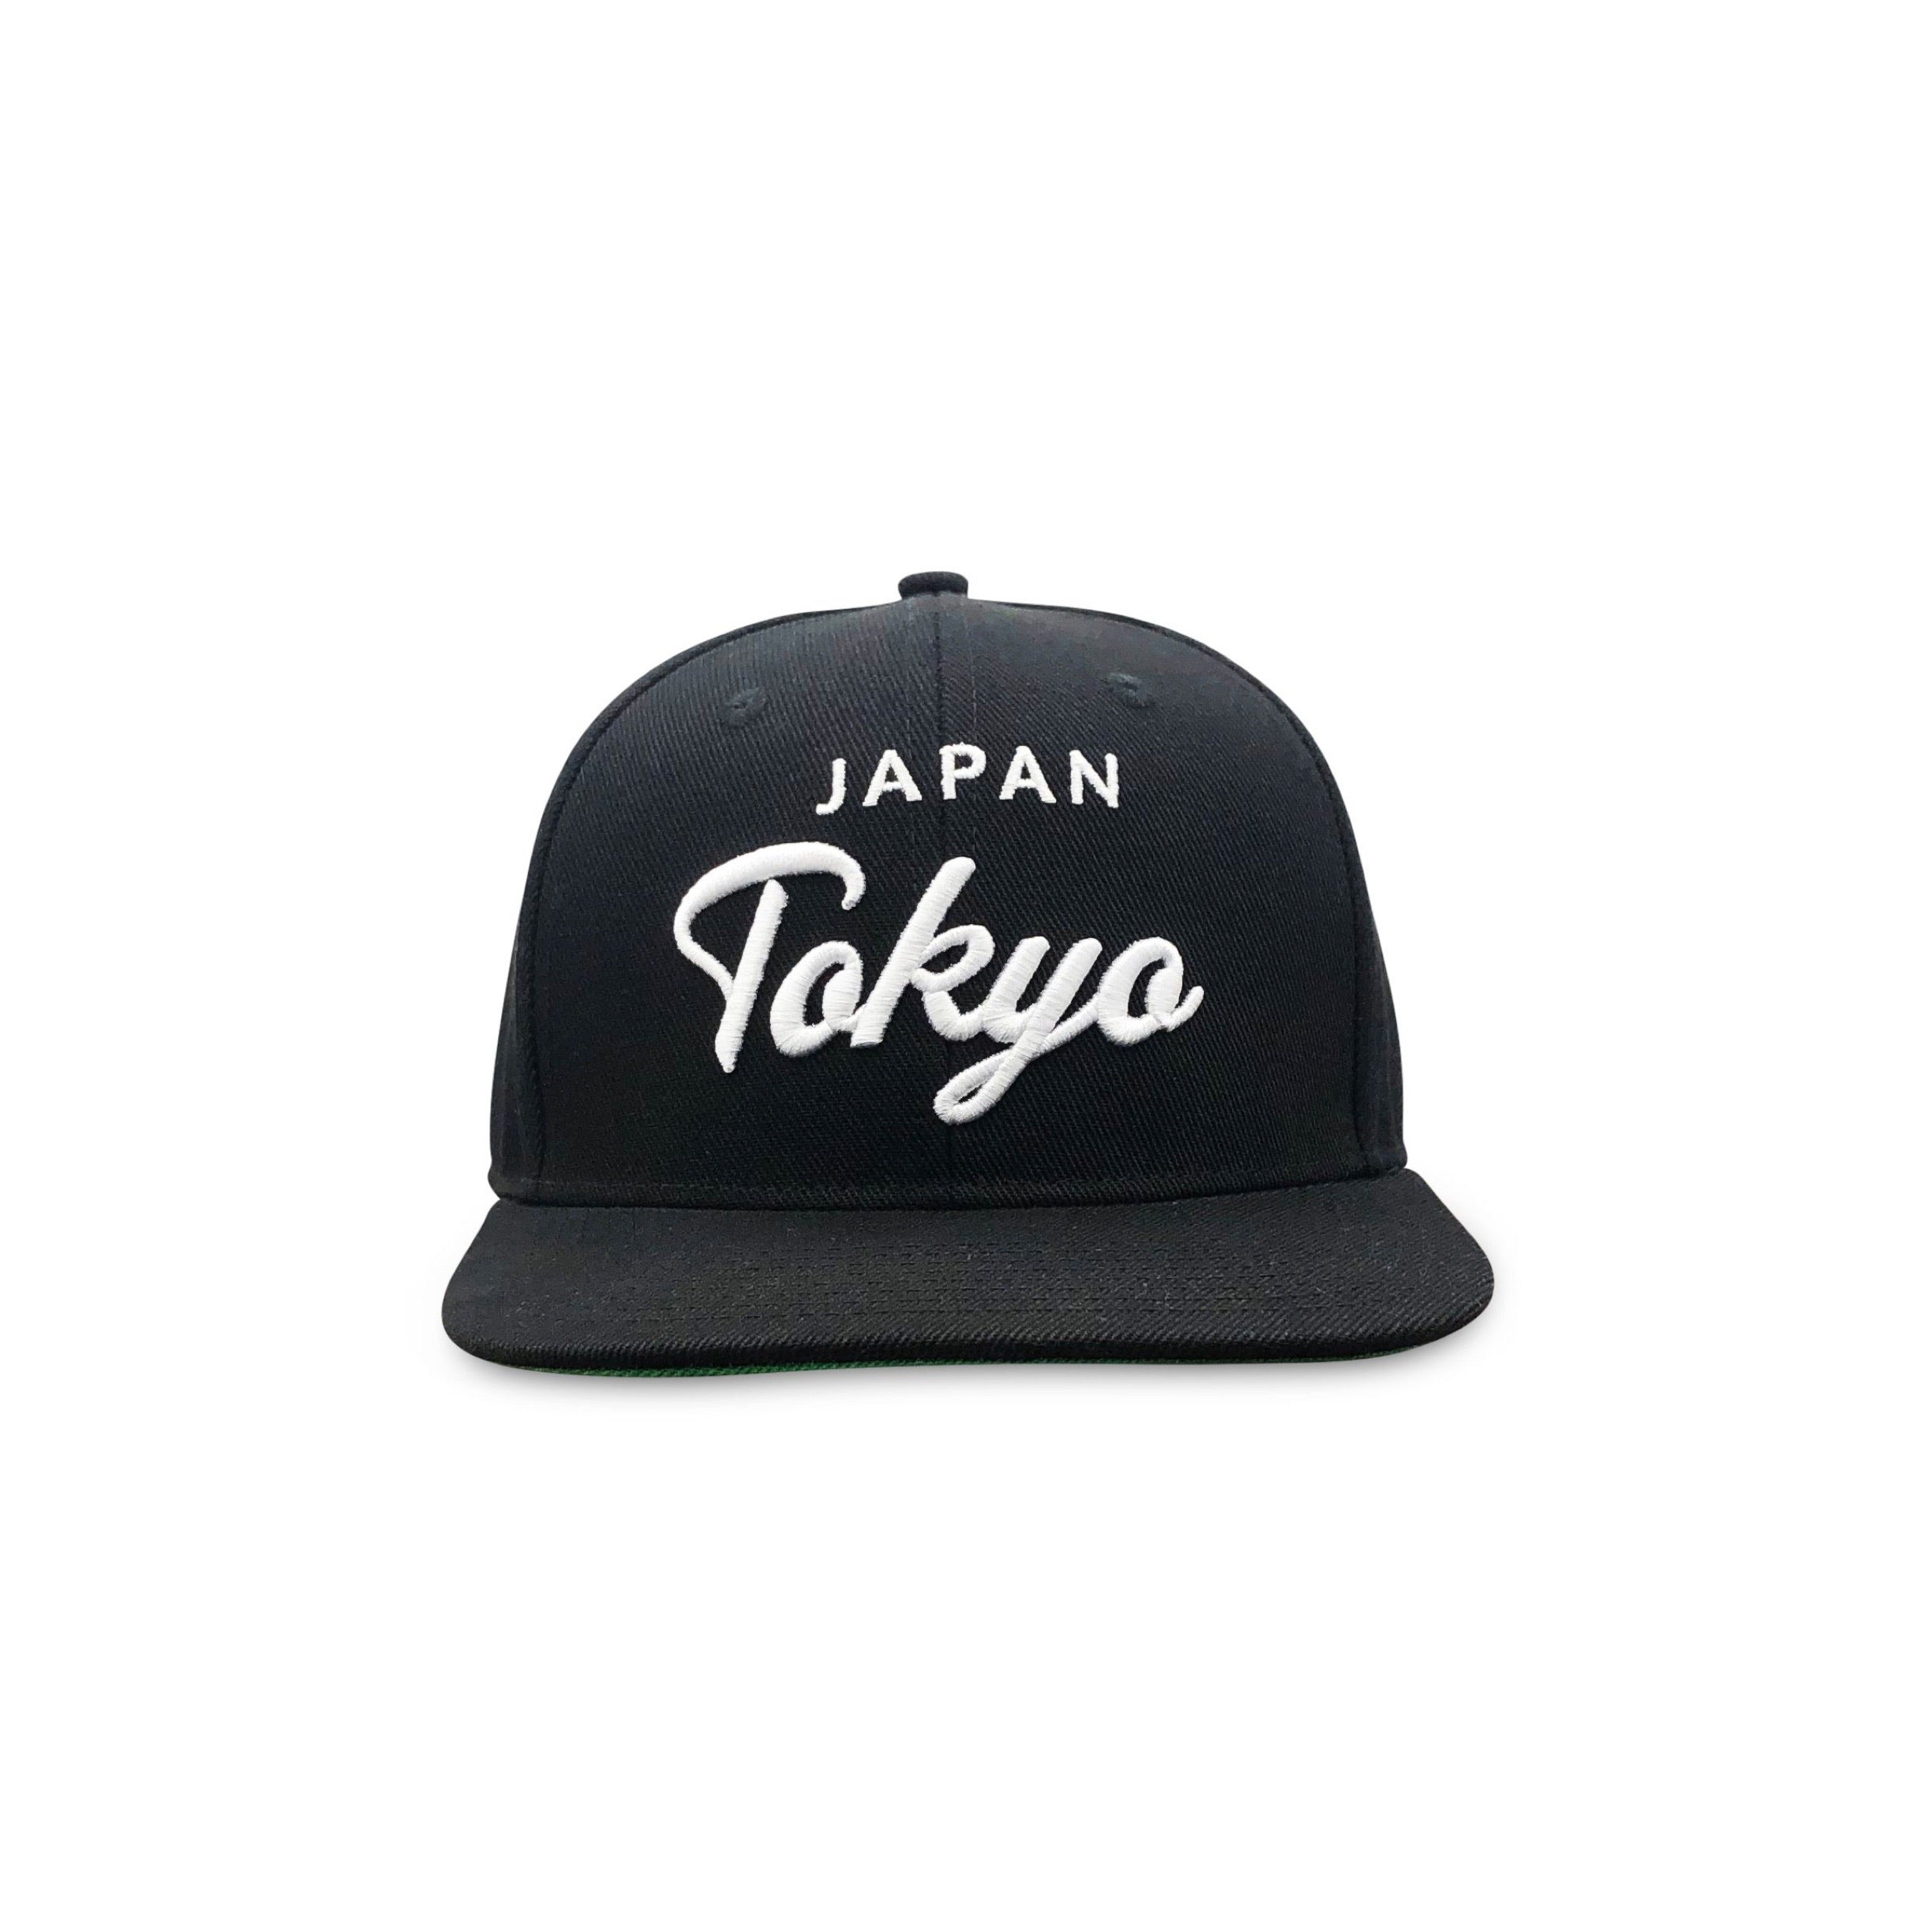 Japanklyn's Hats Collection | Where Tokyo Meets Brooklyn Street Style